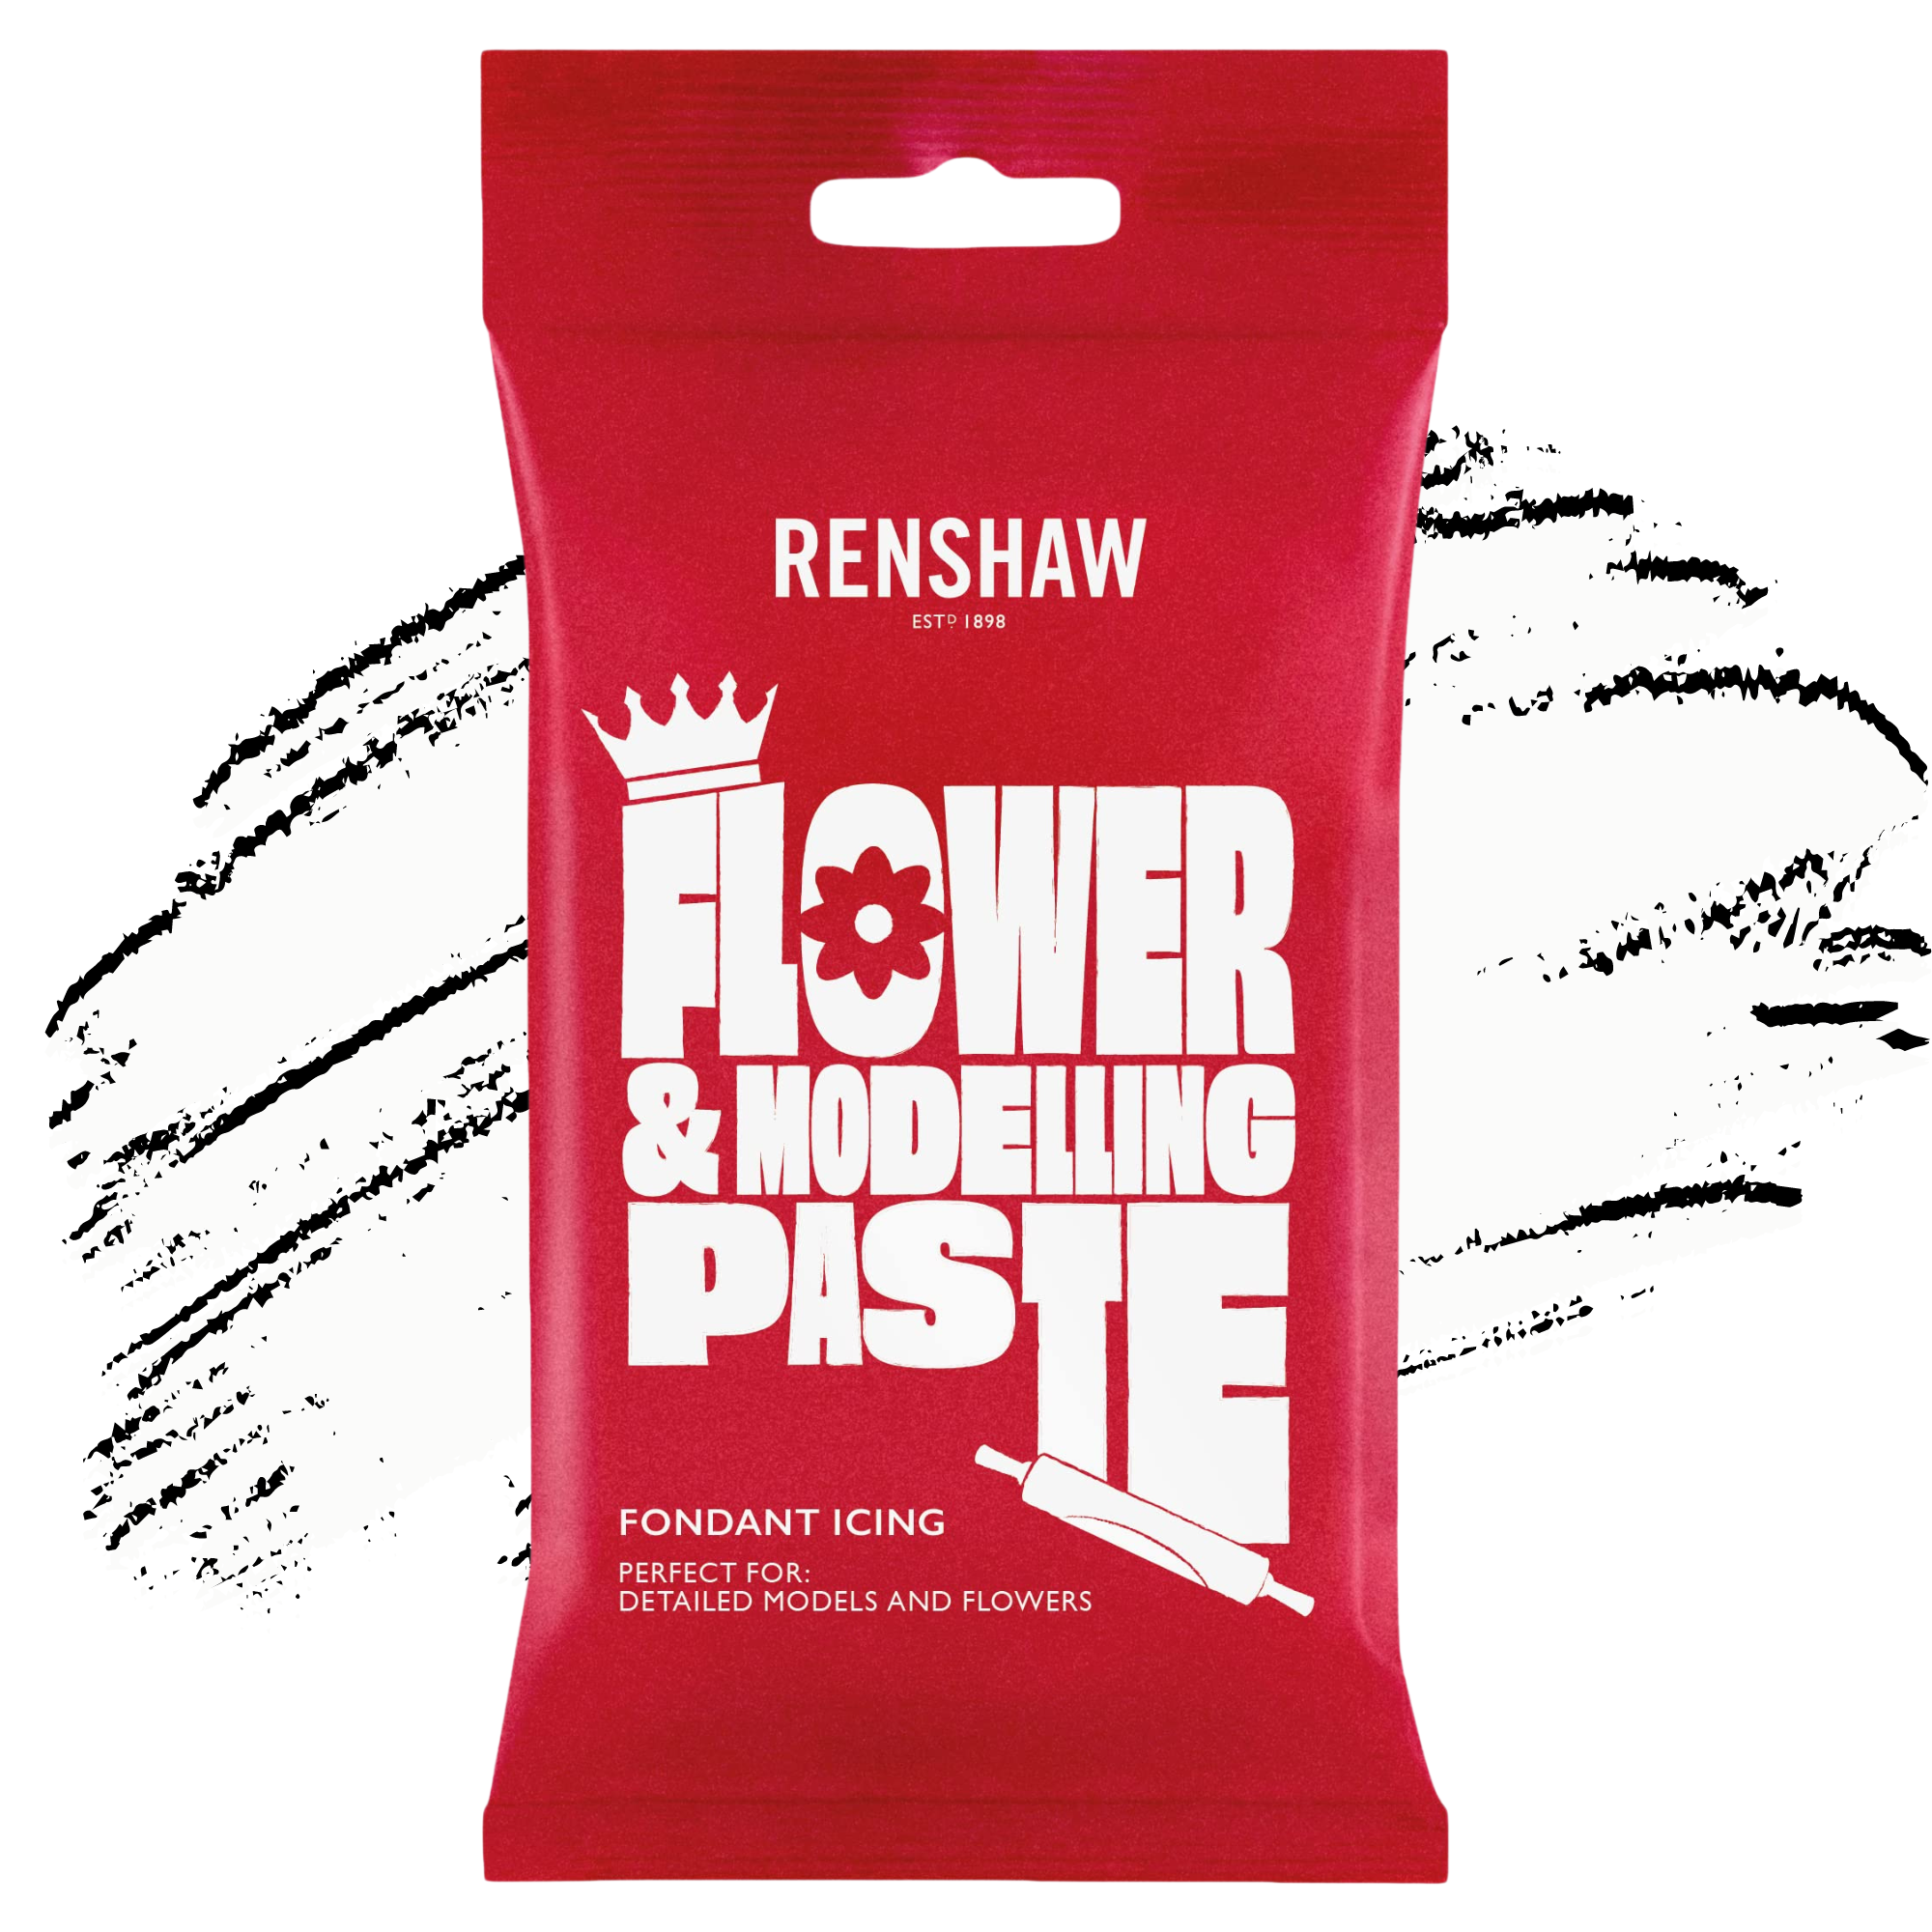 Renshaw Professional Flower and Modelling Paste - White - 250g